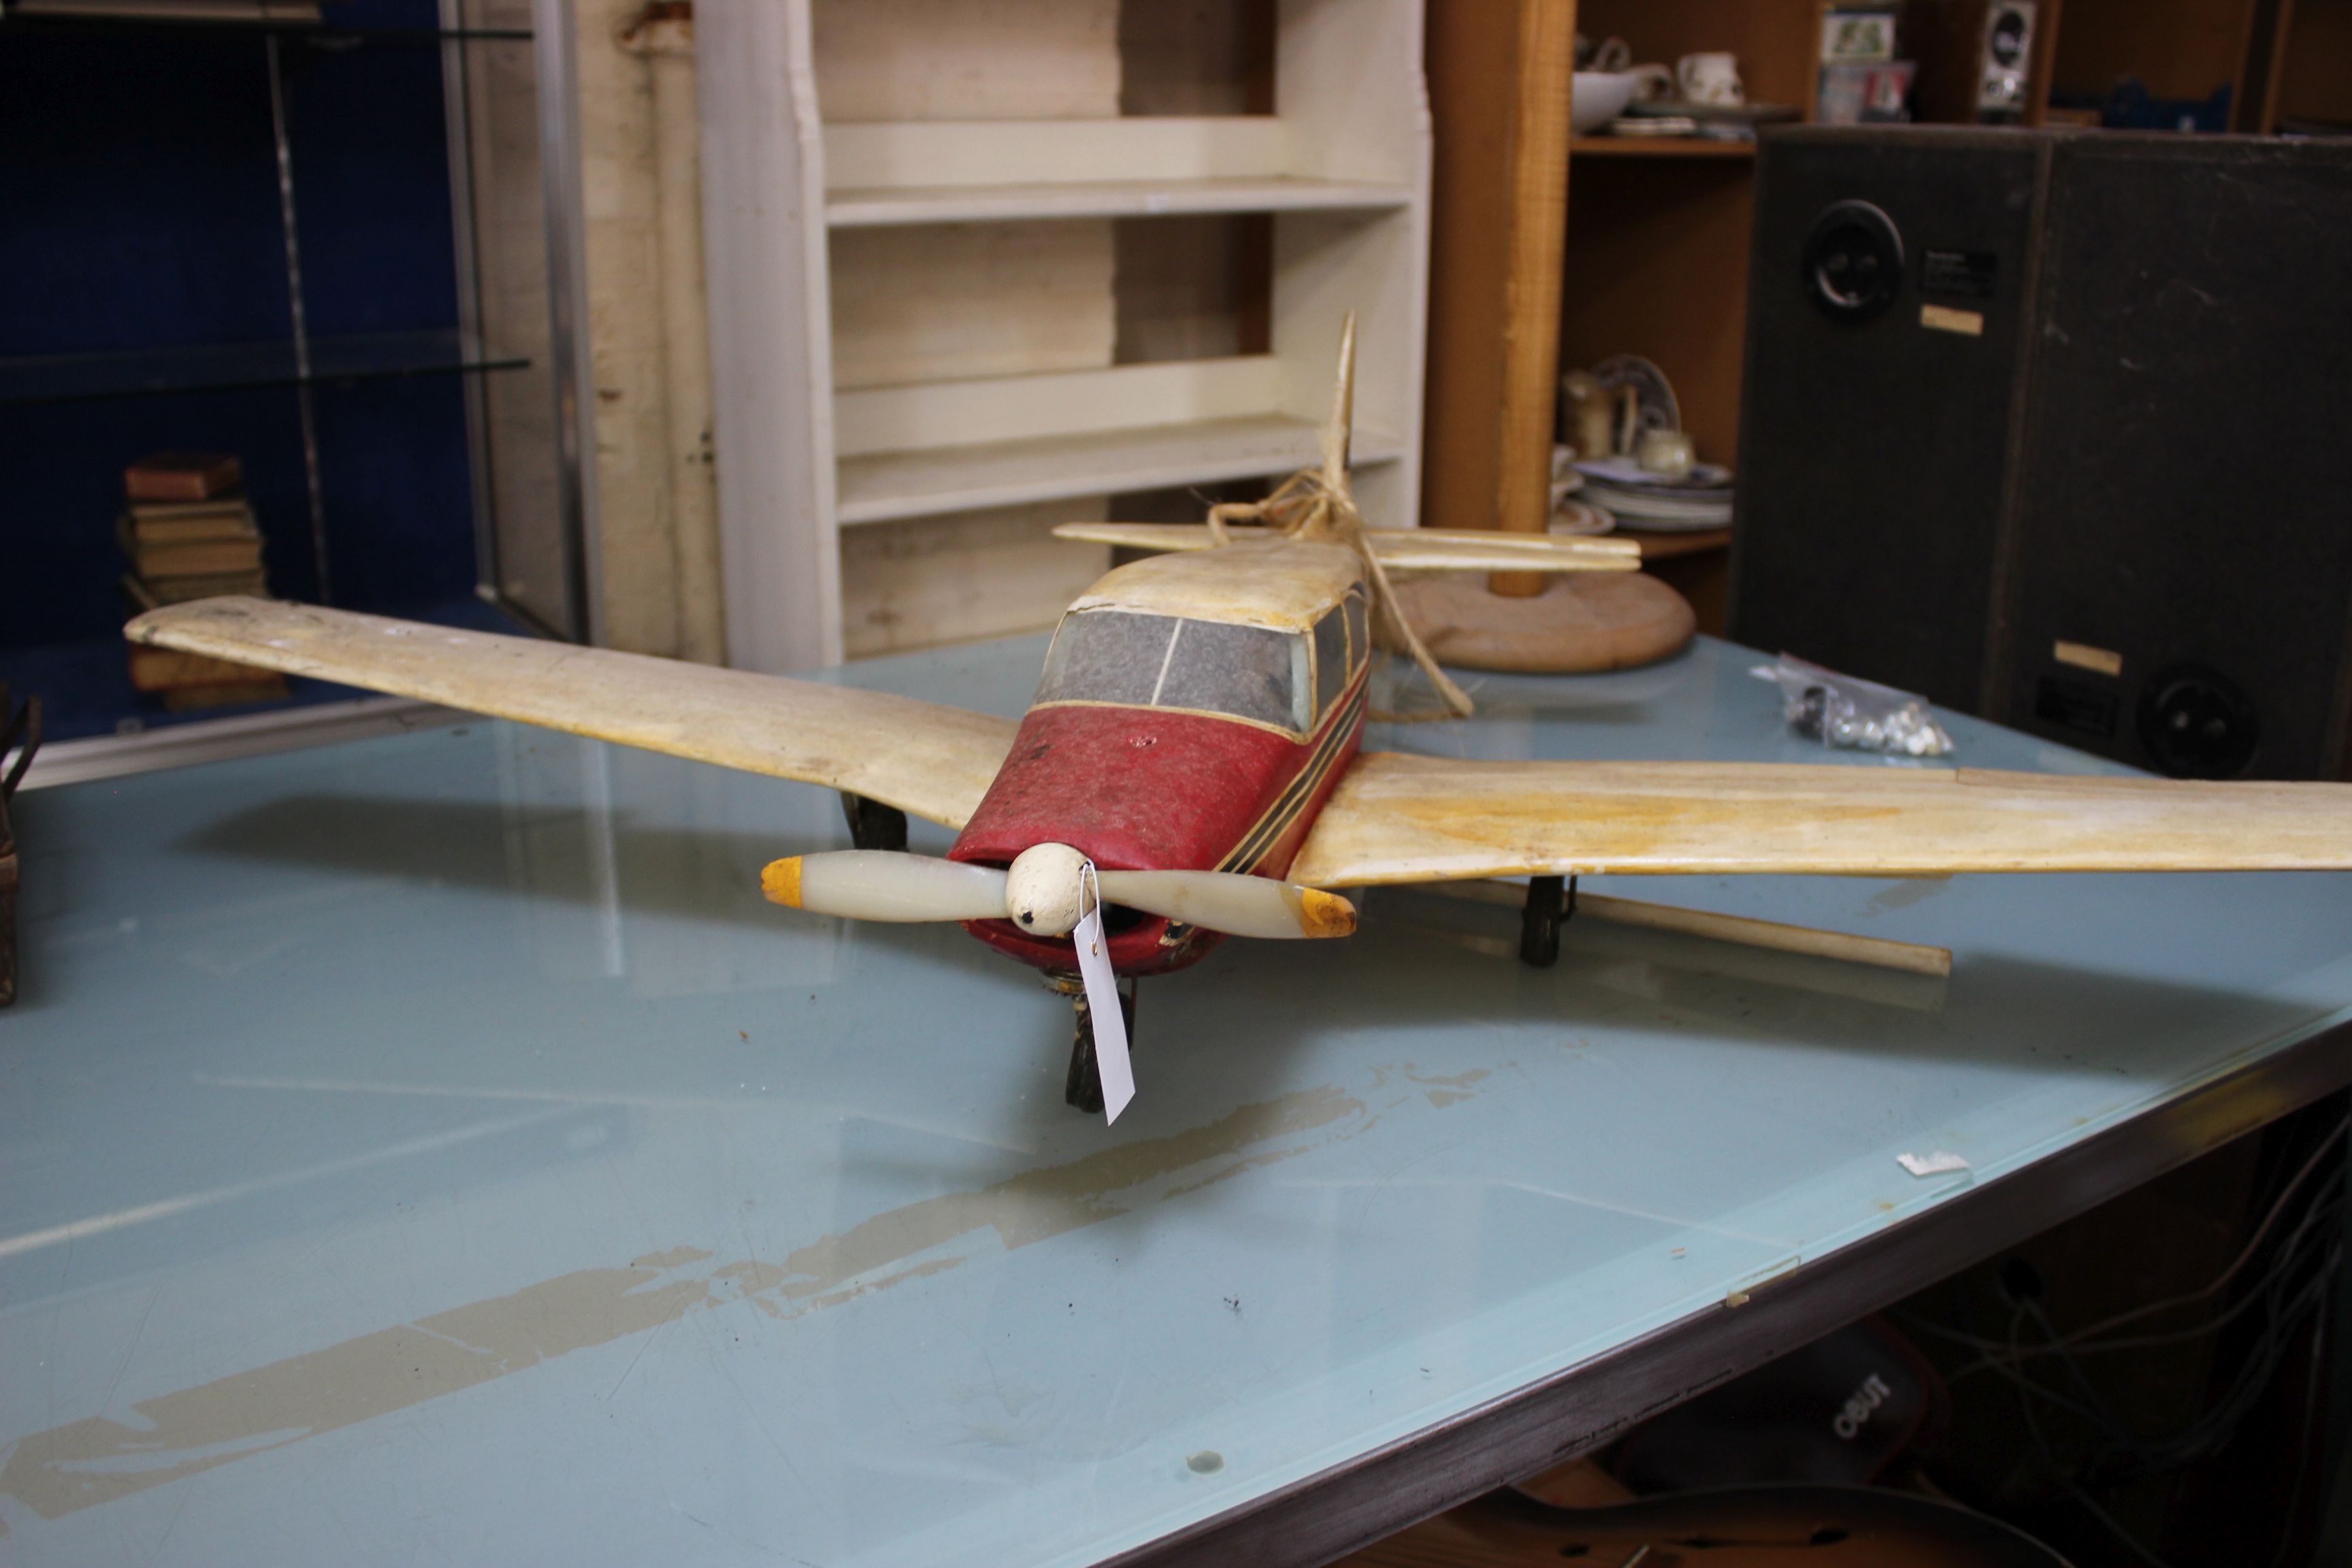 A model of a single propeller plane with a part engine, some damage, wing span 115cm - Image 2 of 2